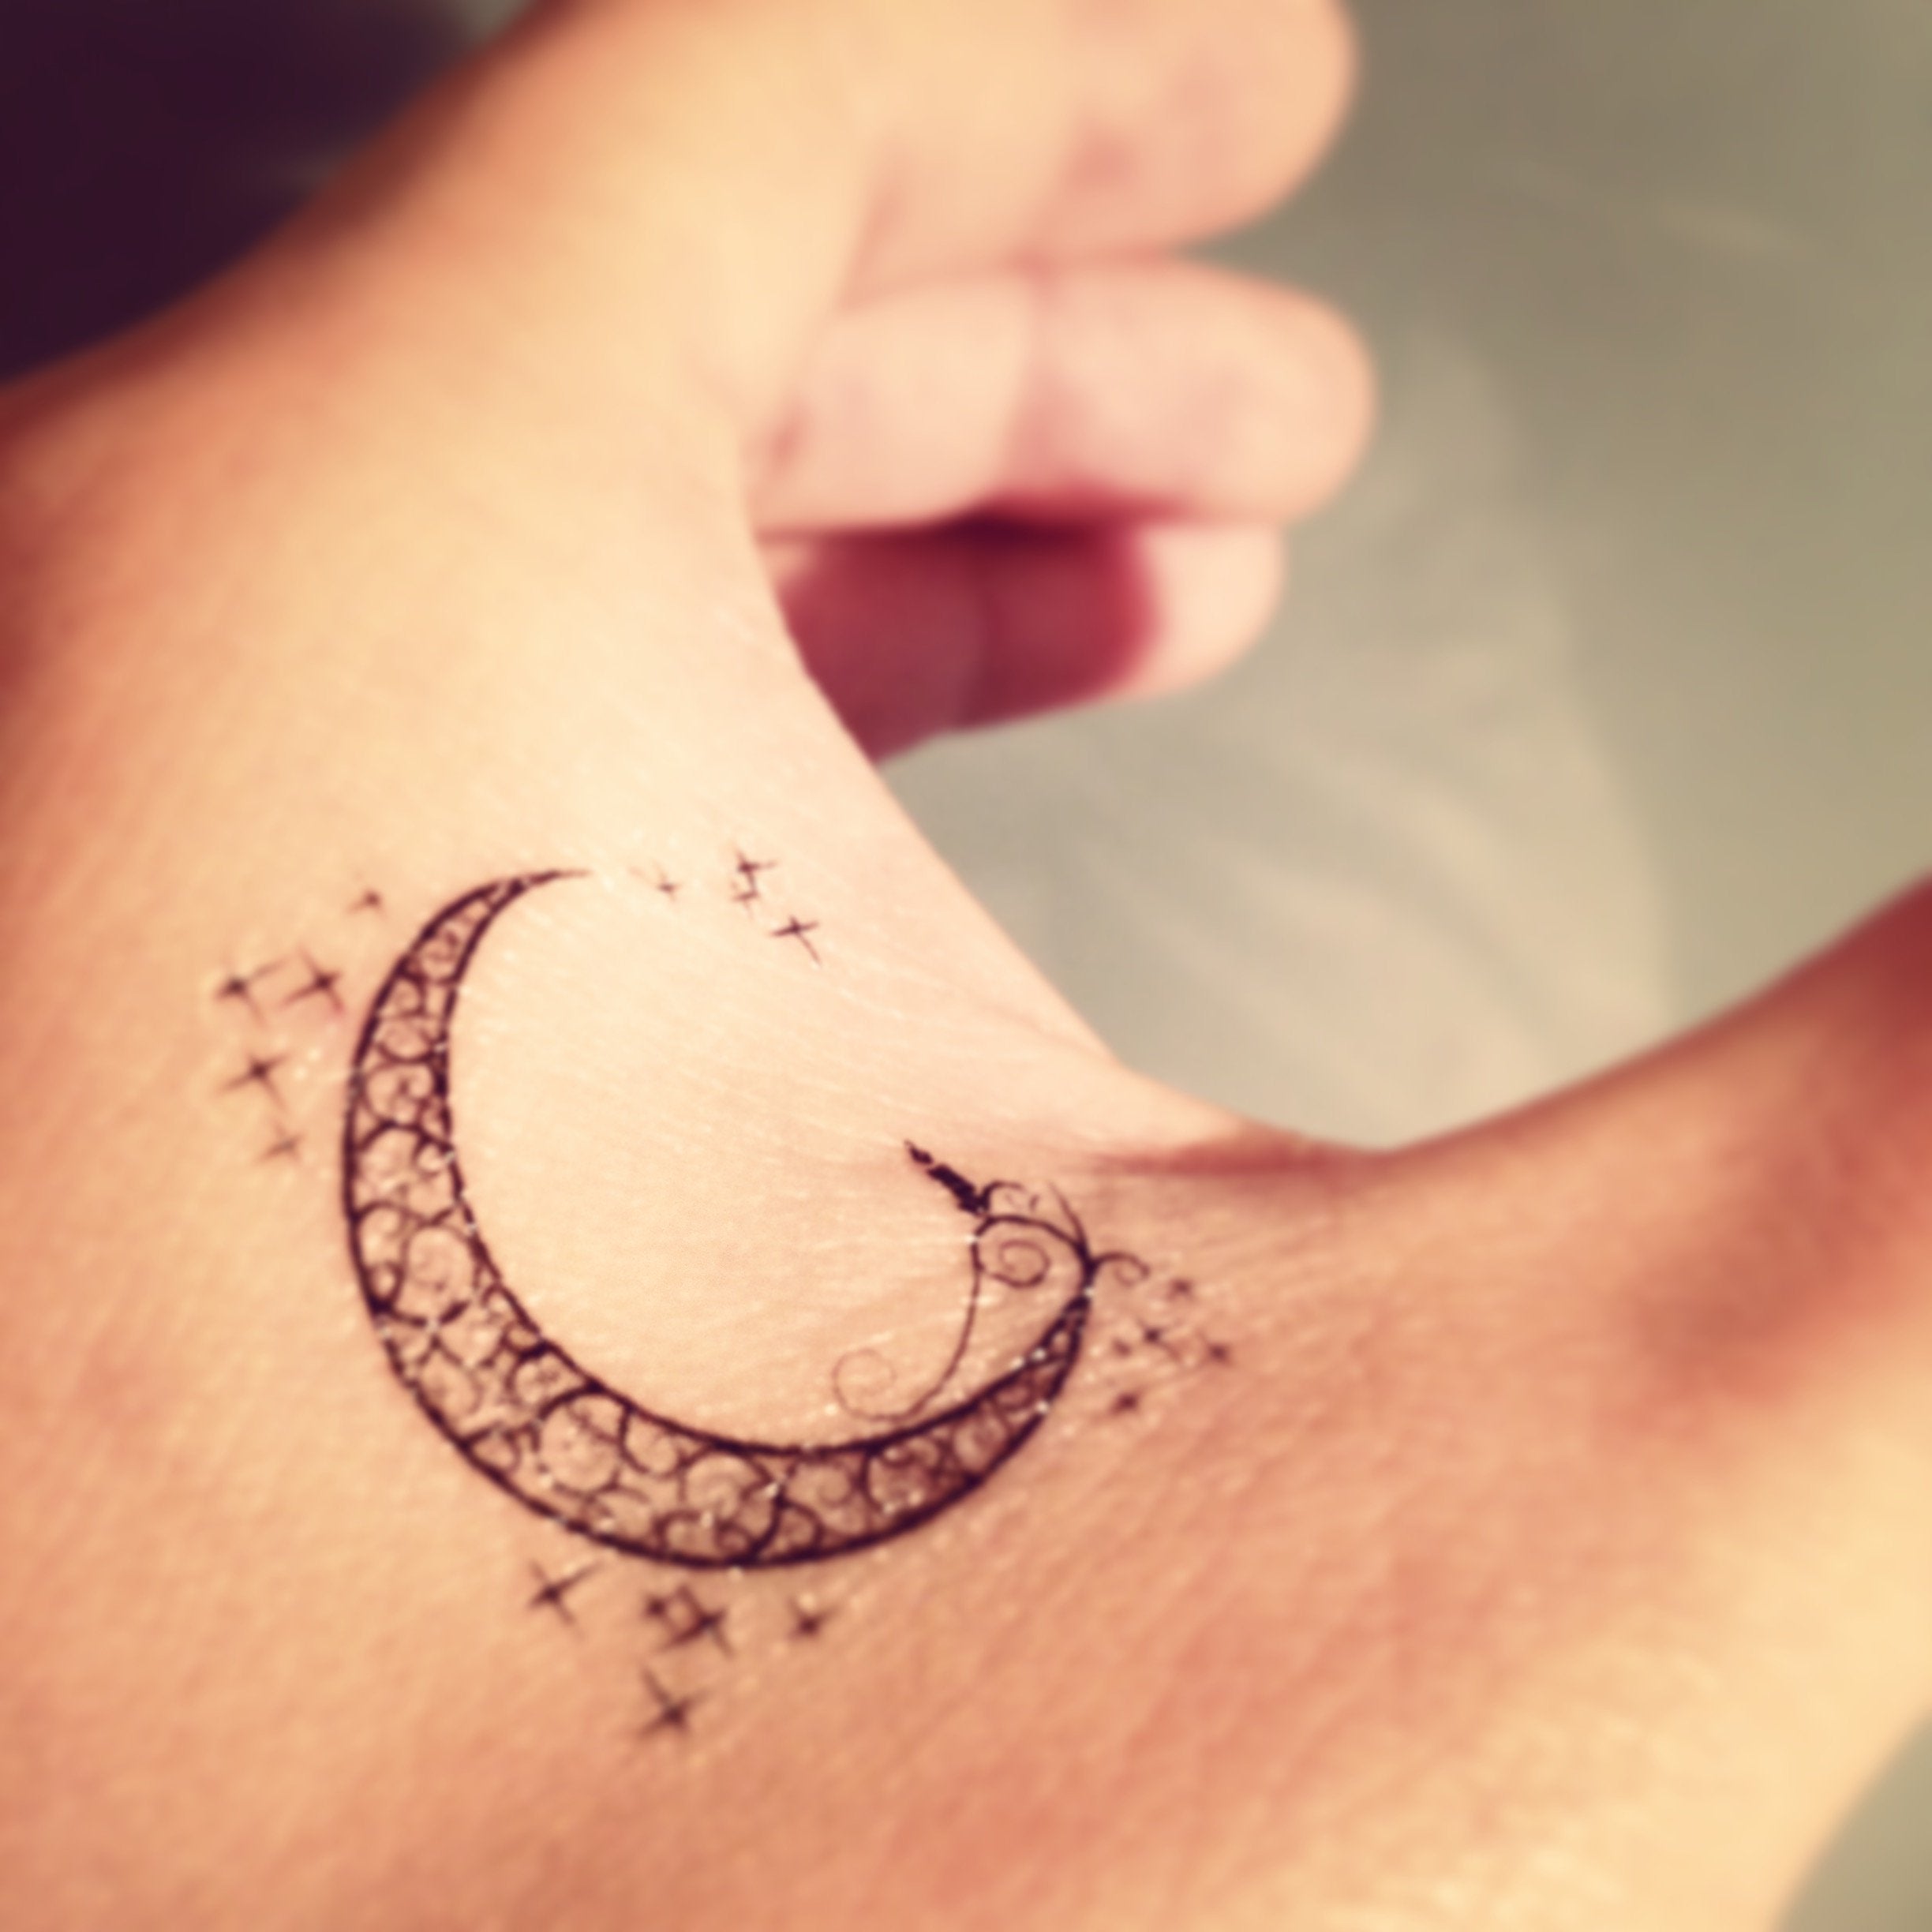 Antique Style Hand Drawn Art Crescent Moon. Boho Chic Tattoo Design Vector  Stock Vector - Illustration of night, medieval: 79305766